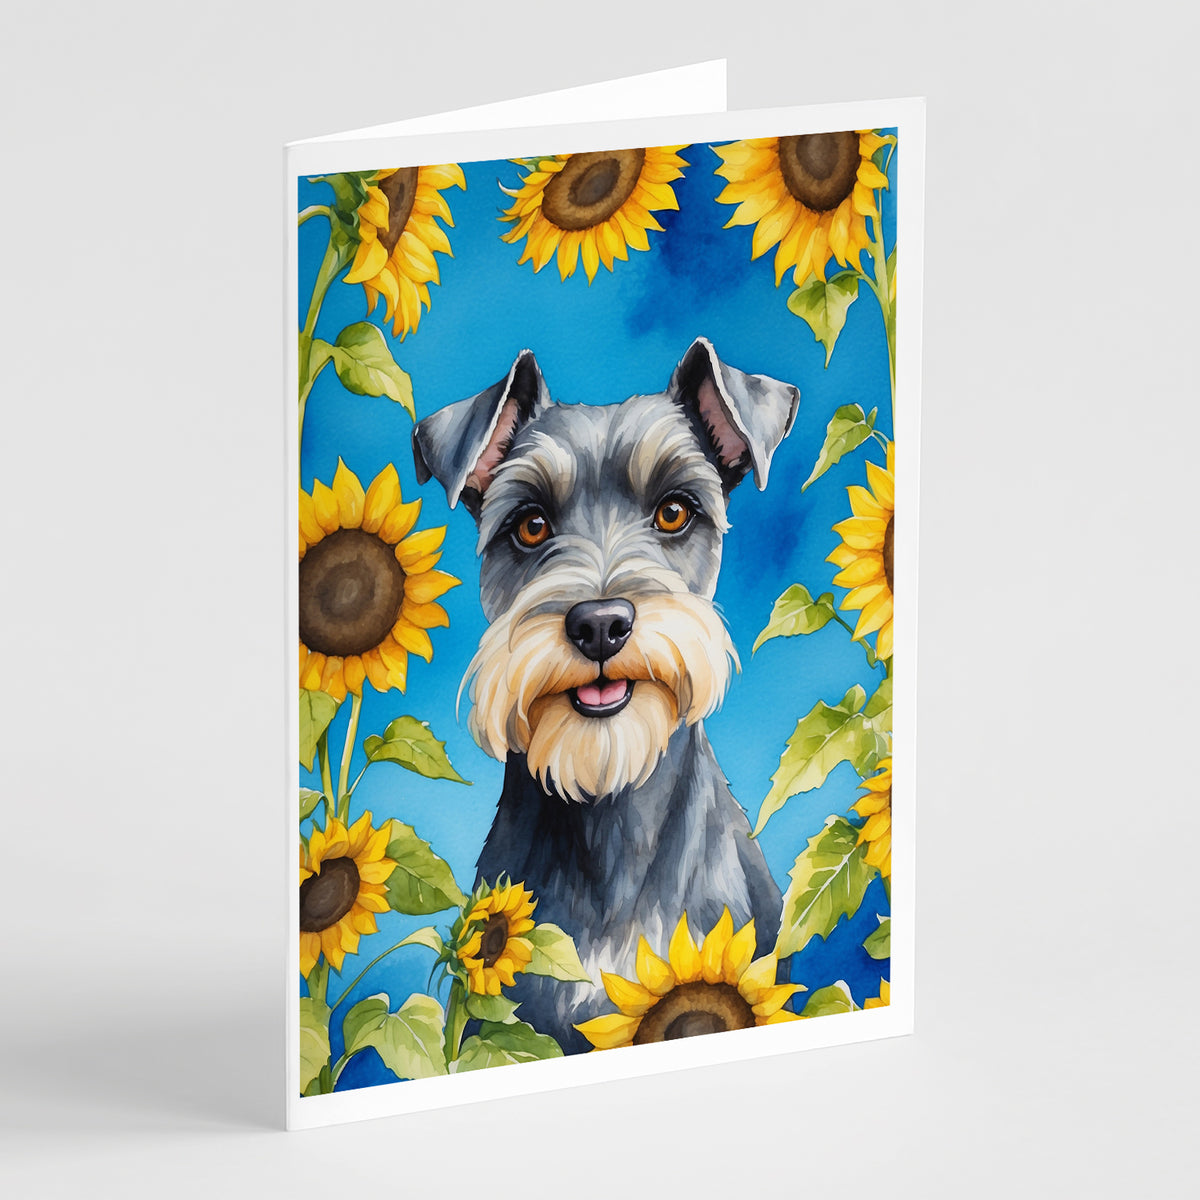 Buy this Schnauzer in Sunflowers Greeting Cards Pack of 8